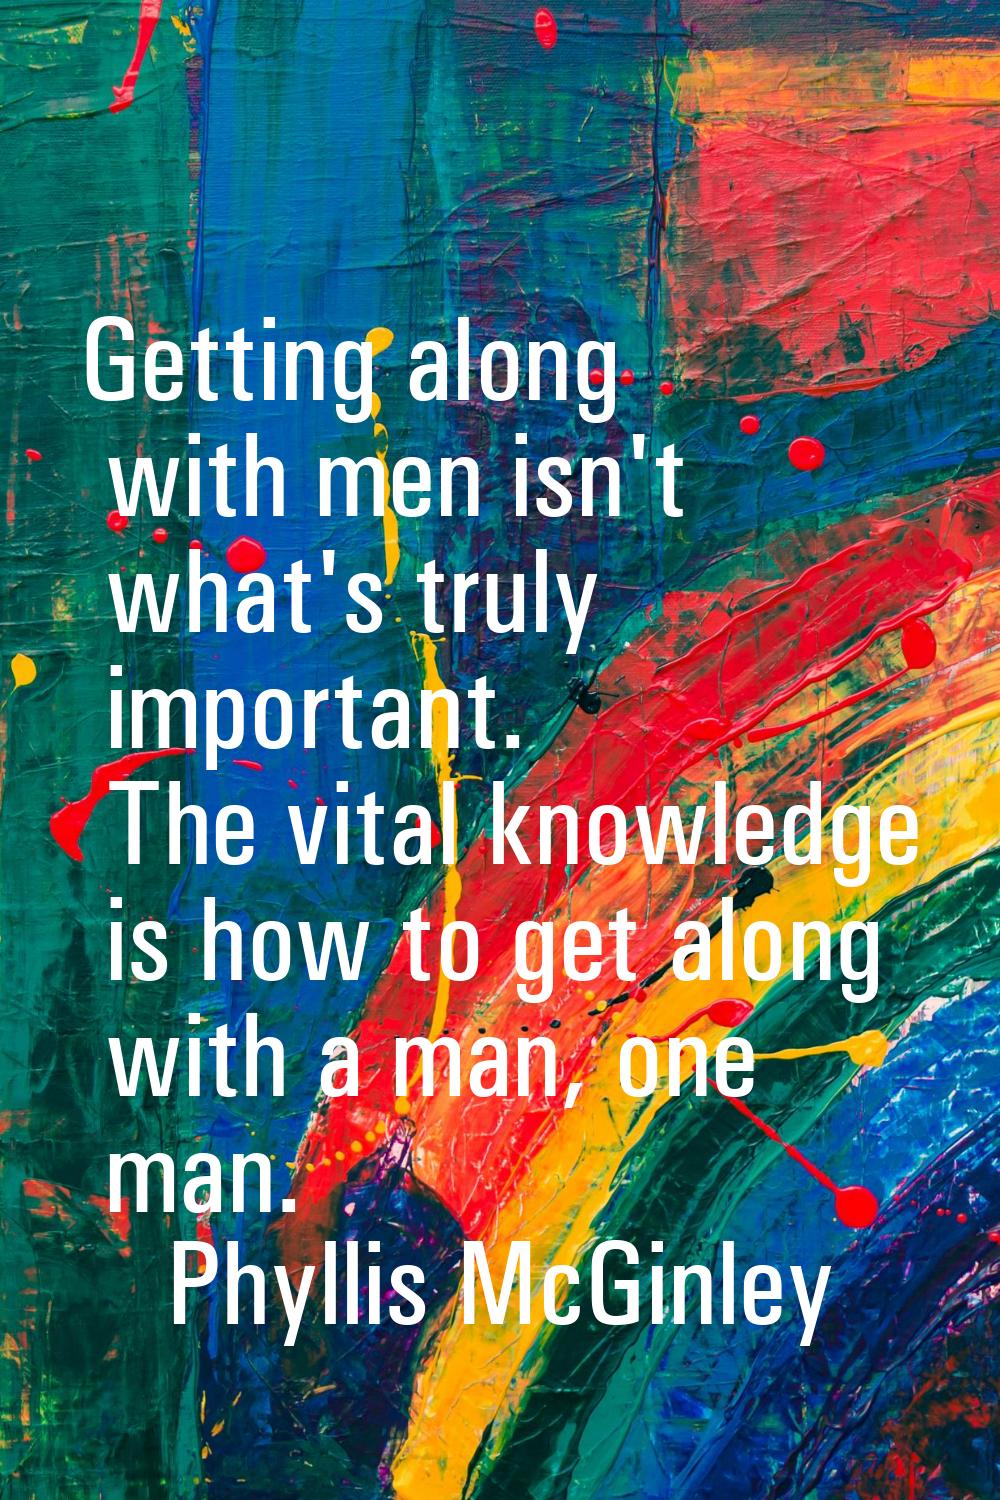 Getting along with men isn't what's truly important. The vital knowledge is how to get along with a